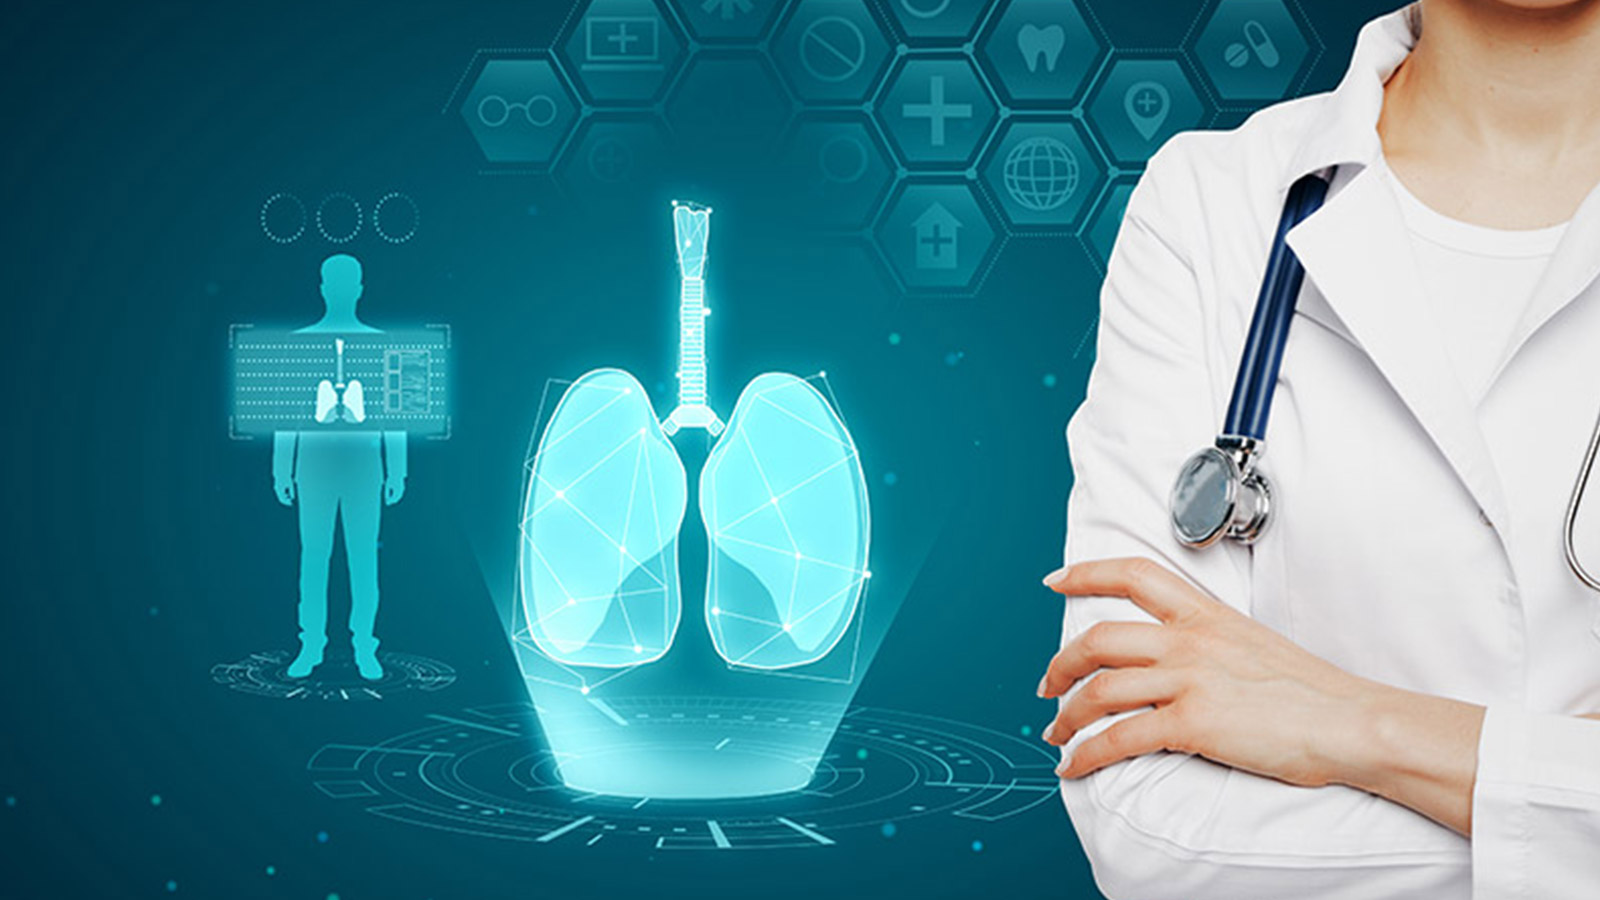 Pulmonology is the area of medicine that focuses on the respiratory systemâ€™s health. Pulmonologists are medical specialists that diagnose and treat conditions affecting the respiratory system.